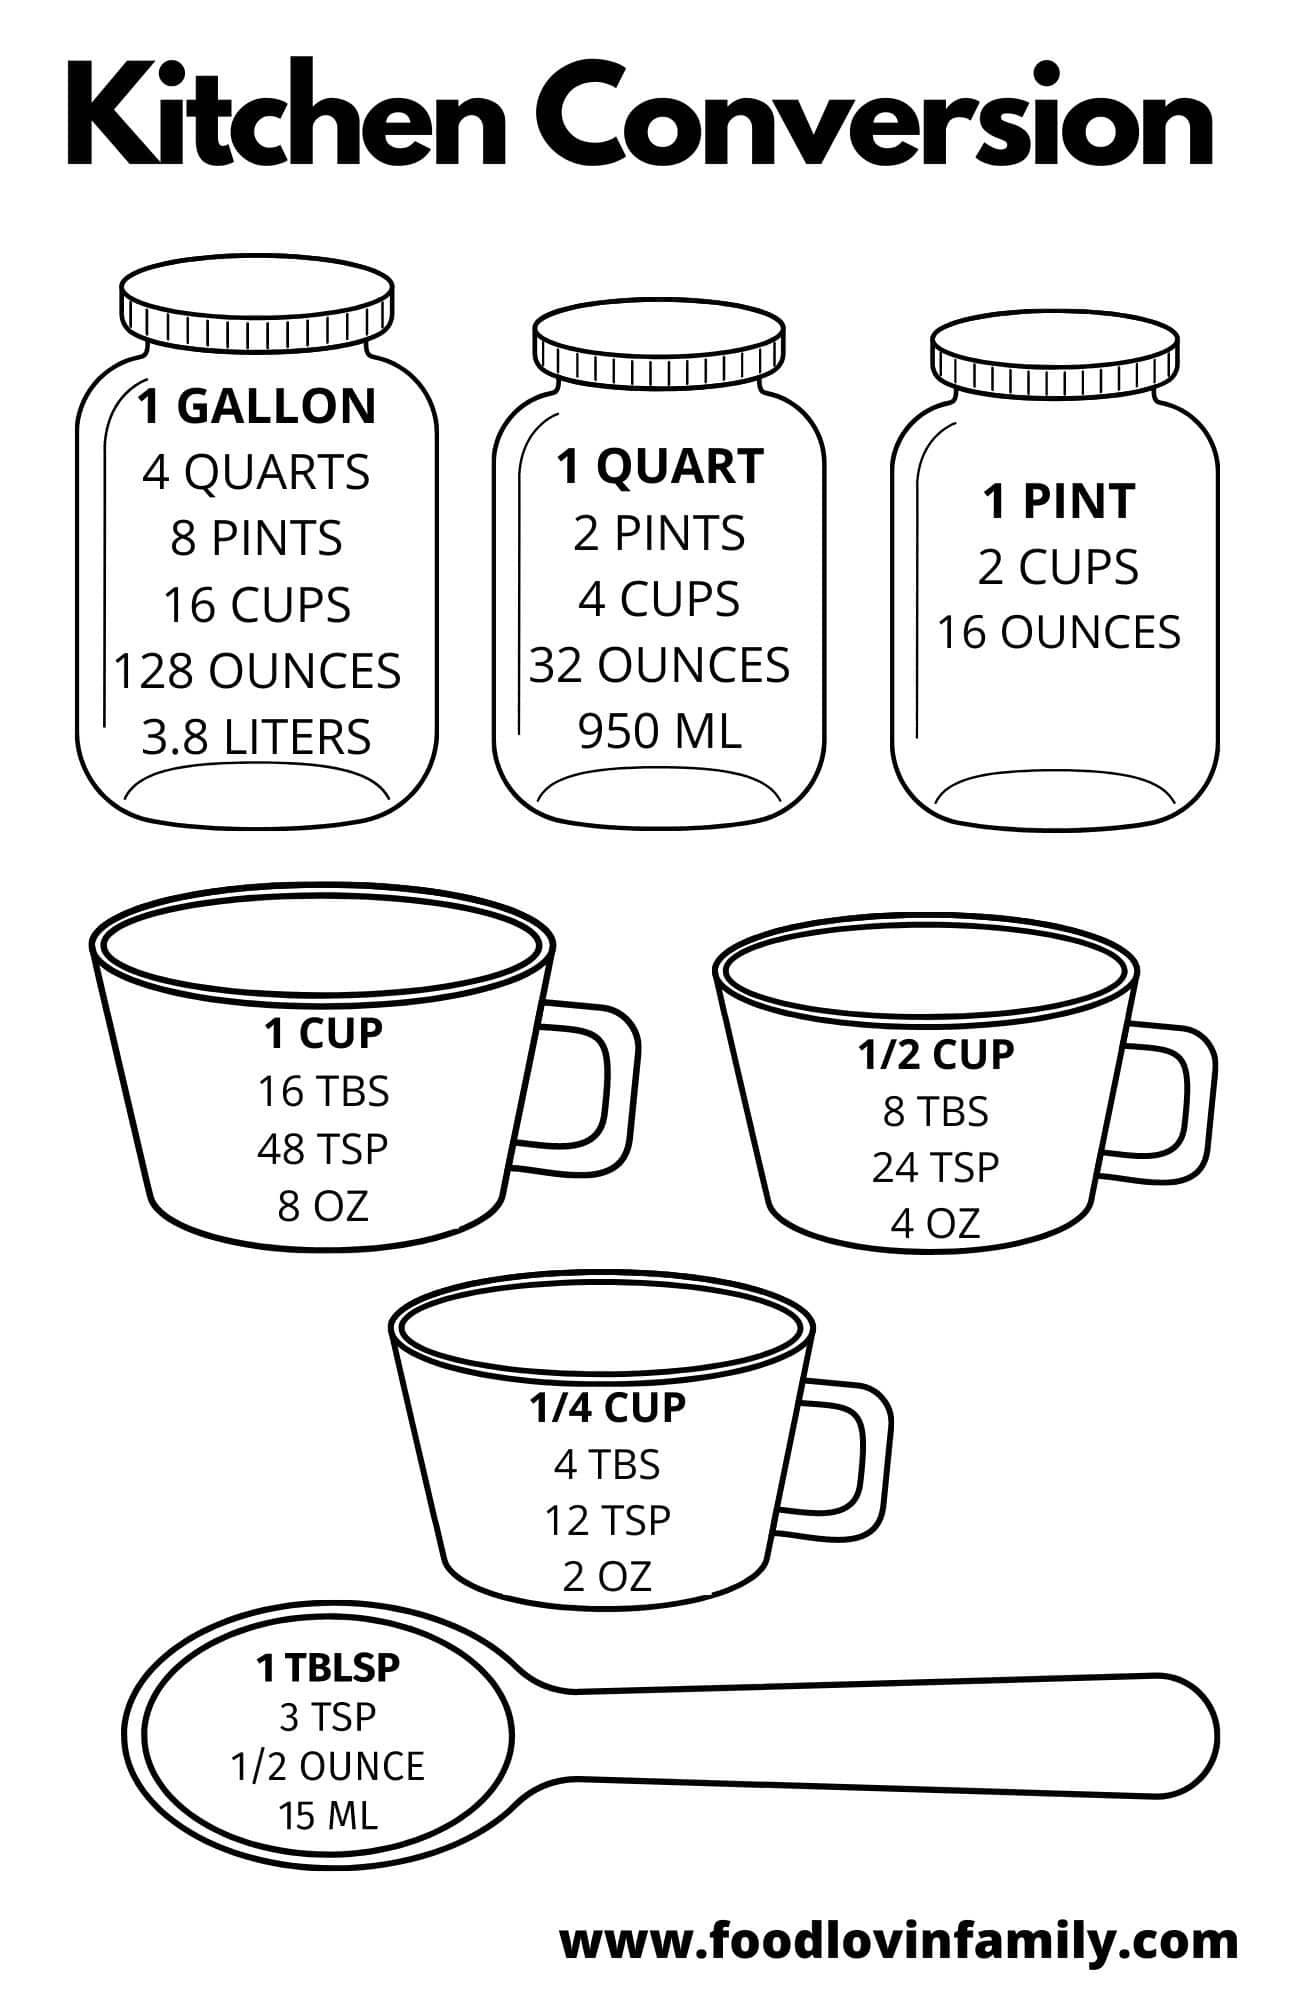 How Many Cups In A Quart, Pint, Gallon? (Free Printable Chart